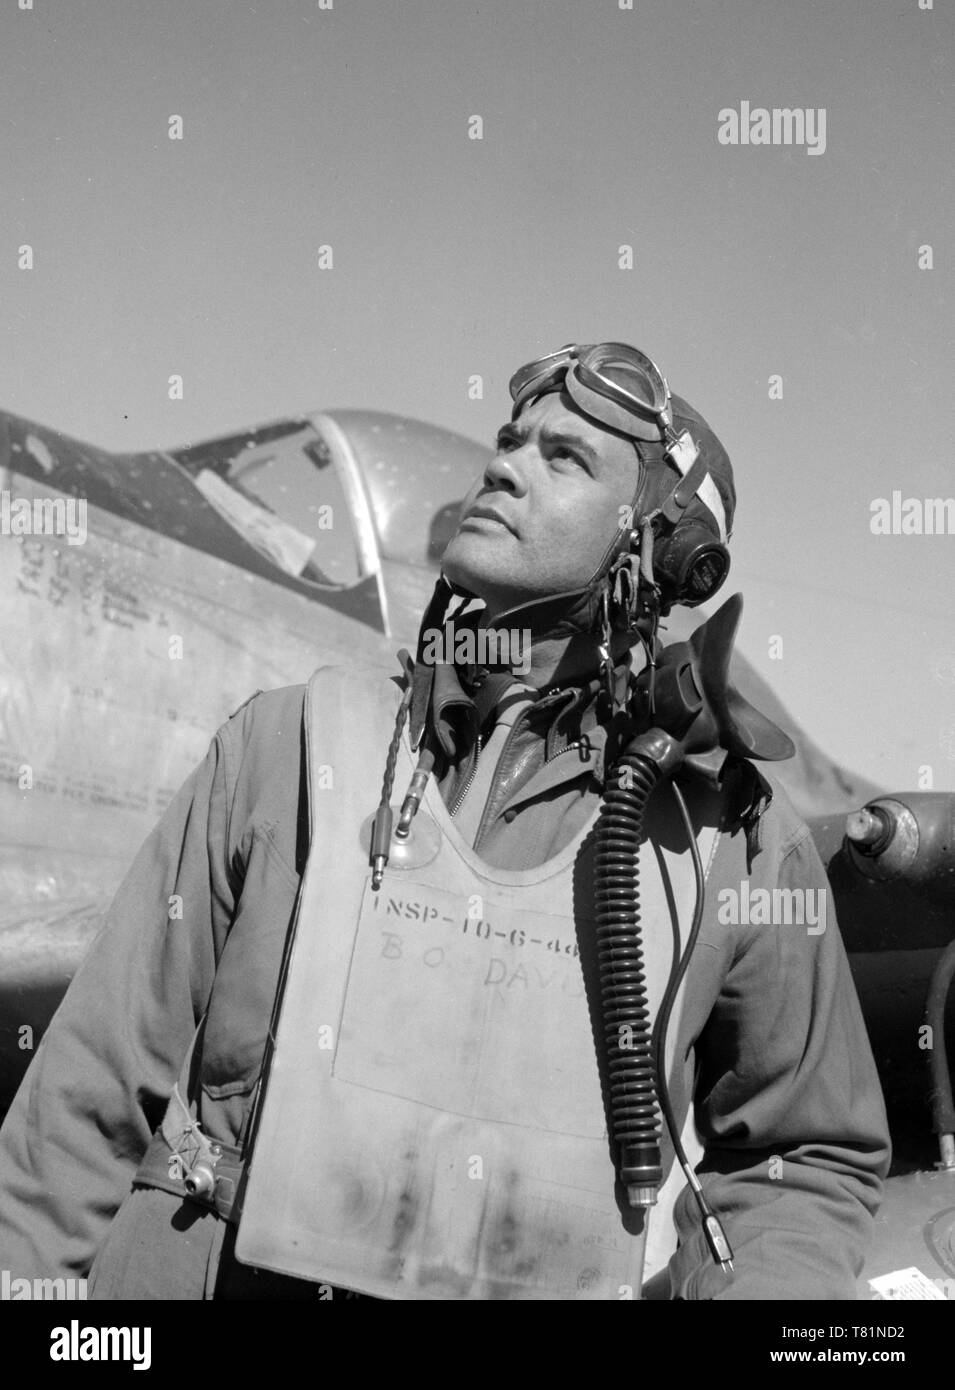 TUSKEGEE AIRMEN PILOT RETURNS TO THE U.S FROM ITALY IN WWII 8X10 PHOTO DA-769 